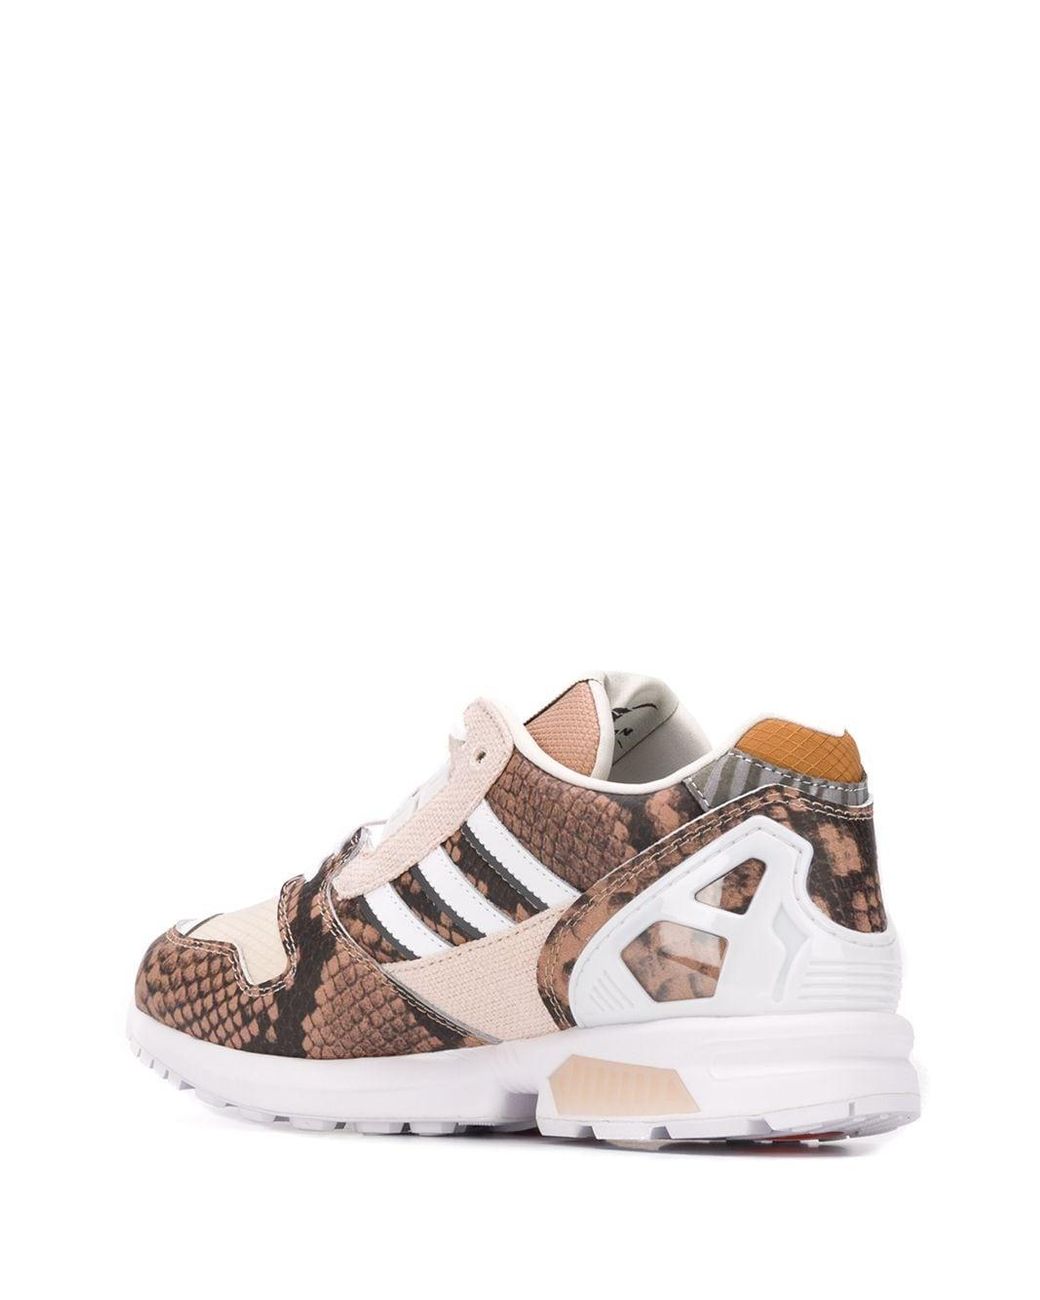 adidas zx 8000 brown leather